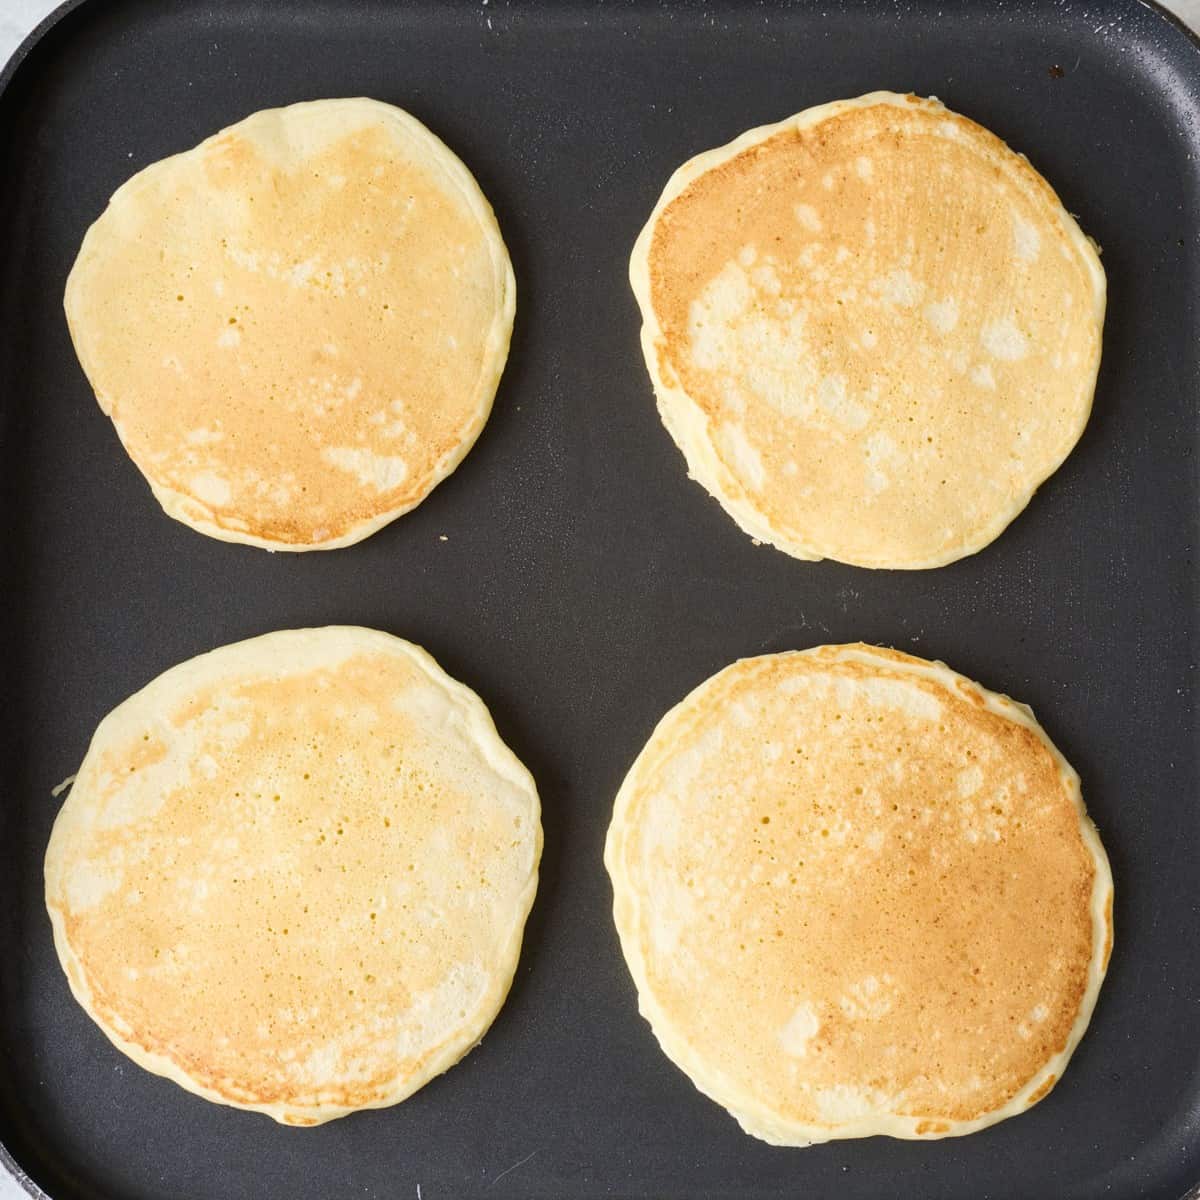 4 pancakes on a griddle after flipping.